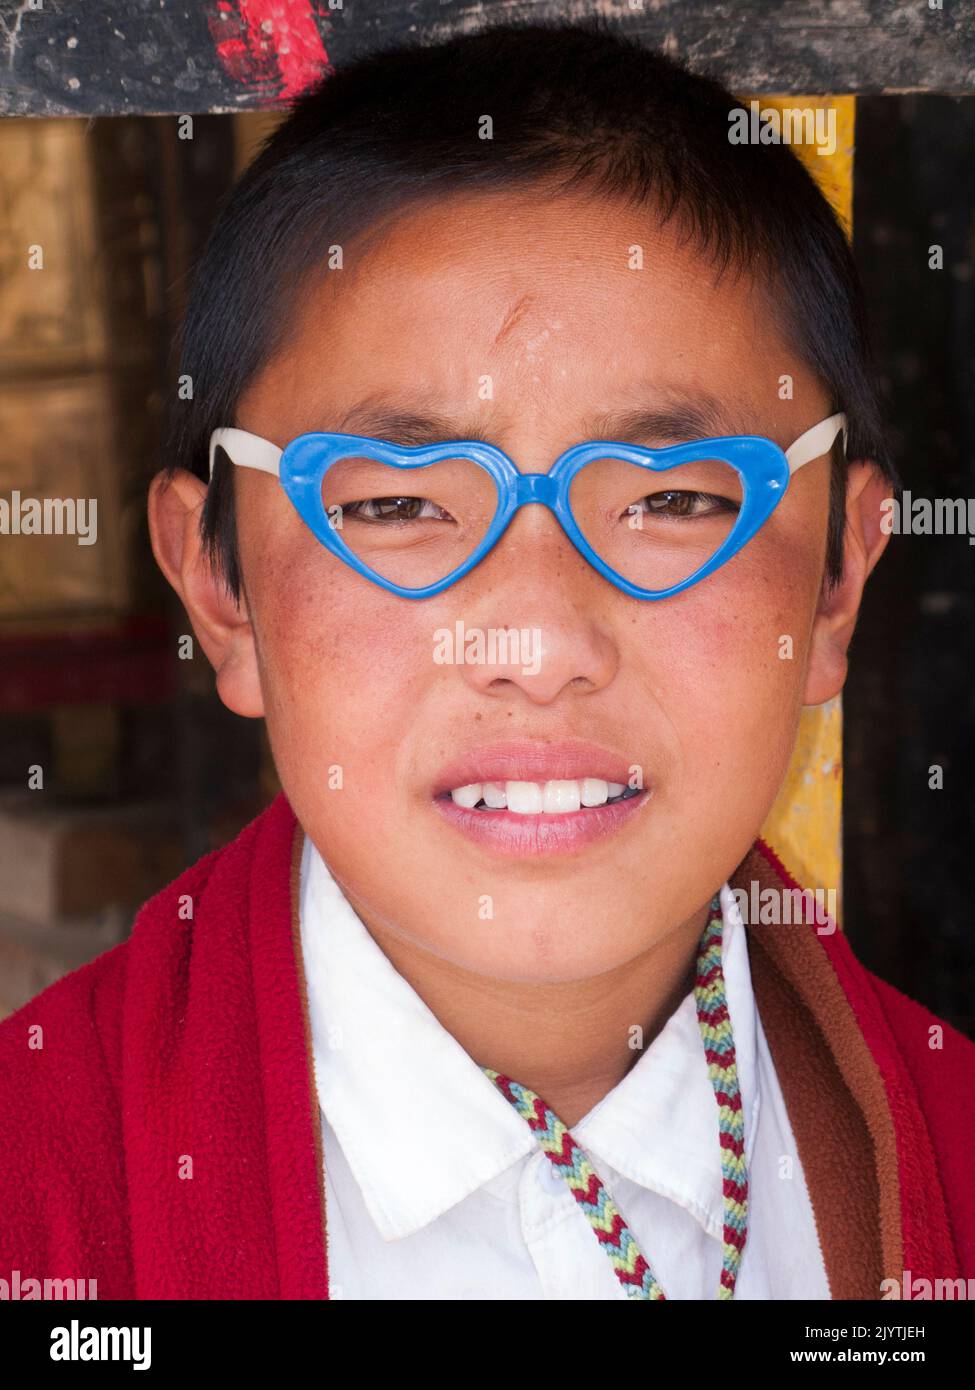 Portrait of local kid / child of Tibetan heritage wearing glasses with a frame shaped like two hearts, a person who is living in China, resident of a small village outside Songpan ancient town in northern Sichuan province. PRC. China (126) Stock Photo